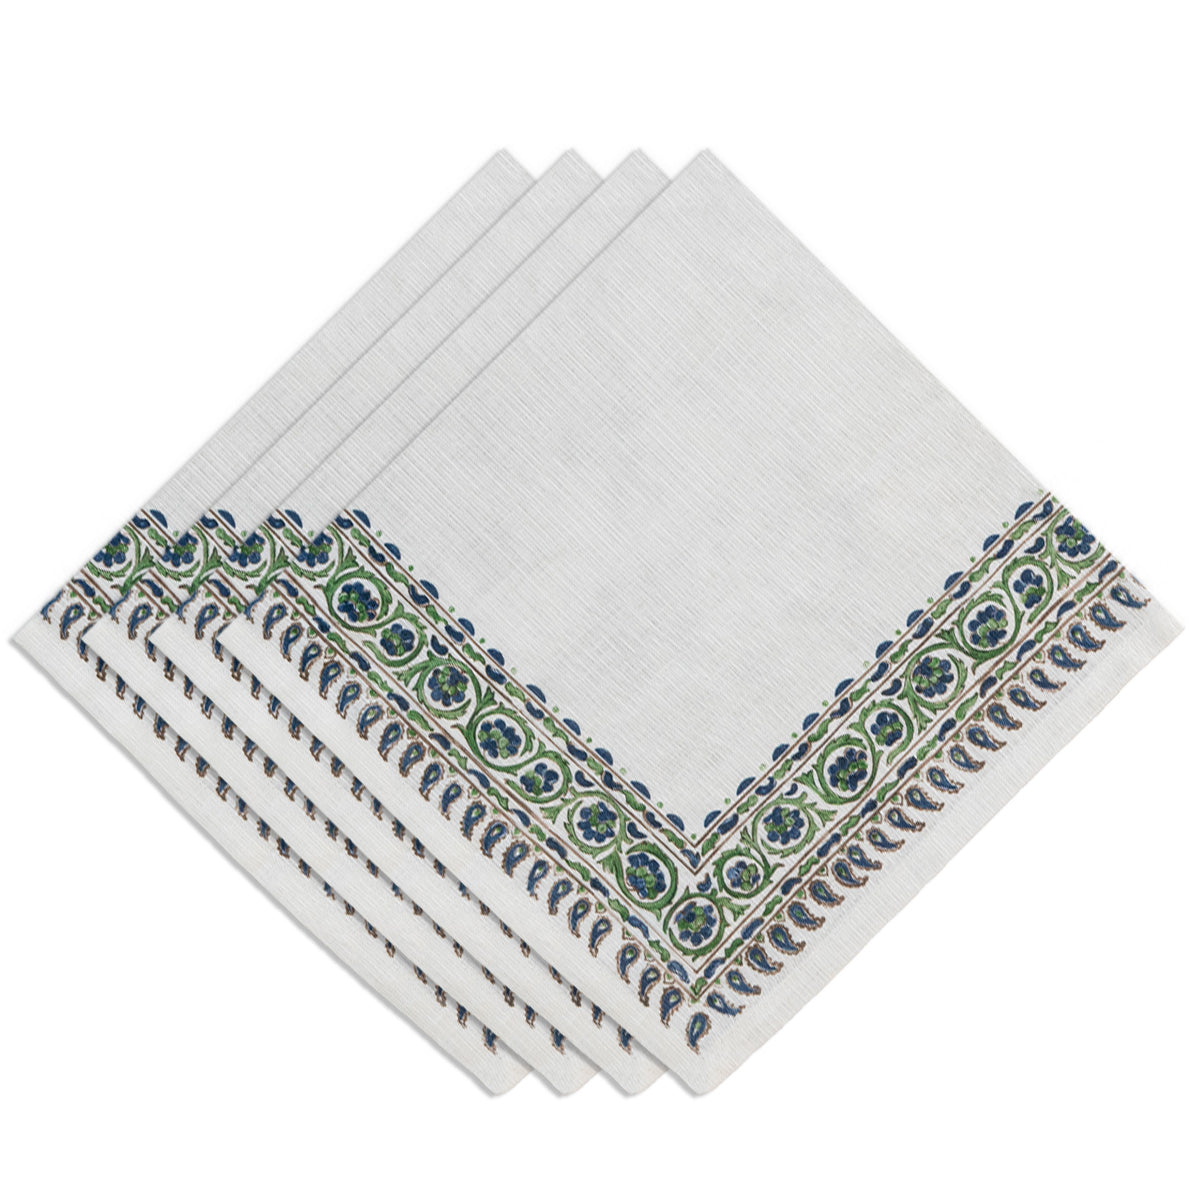 Juliska and Veronica Beard bring you a collaboration inspired by the colors and patterns of the Iberian coast. This set of 4 napkins feature blue and green watercolor motifs, evocative of chic, bohemian style.